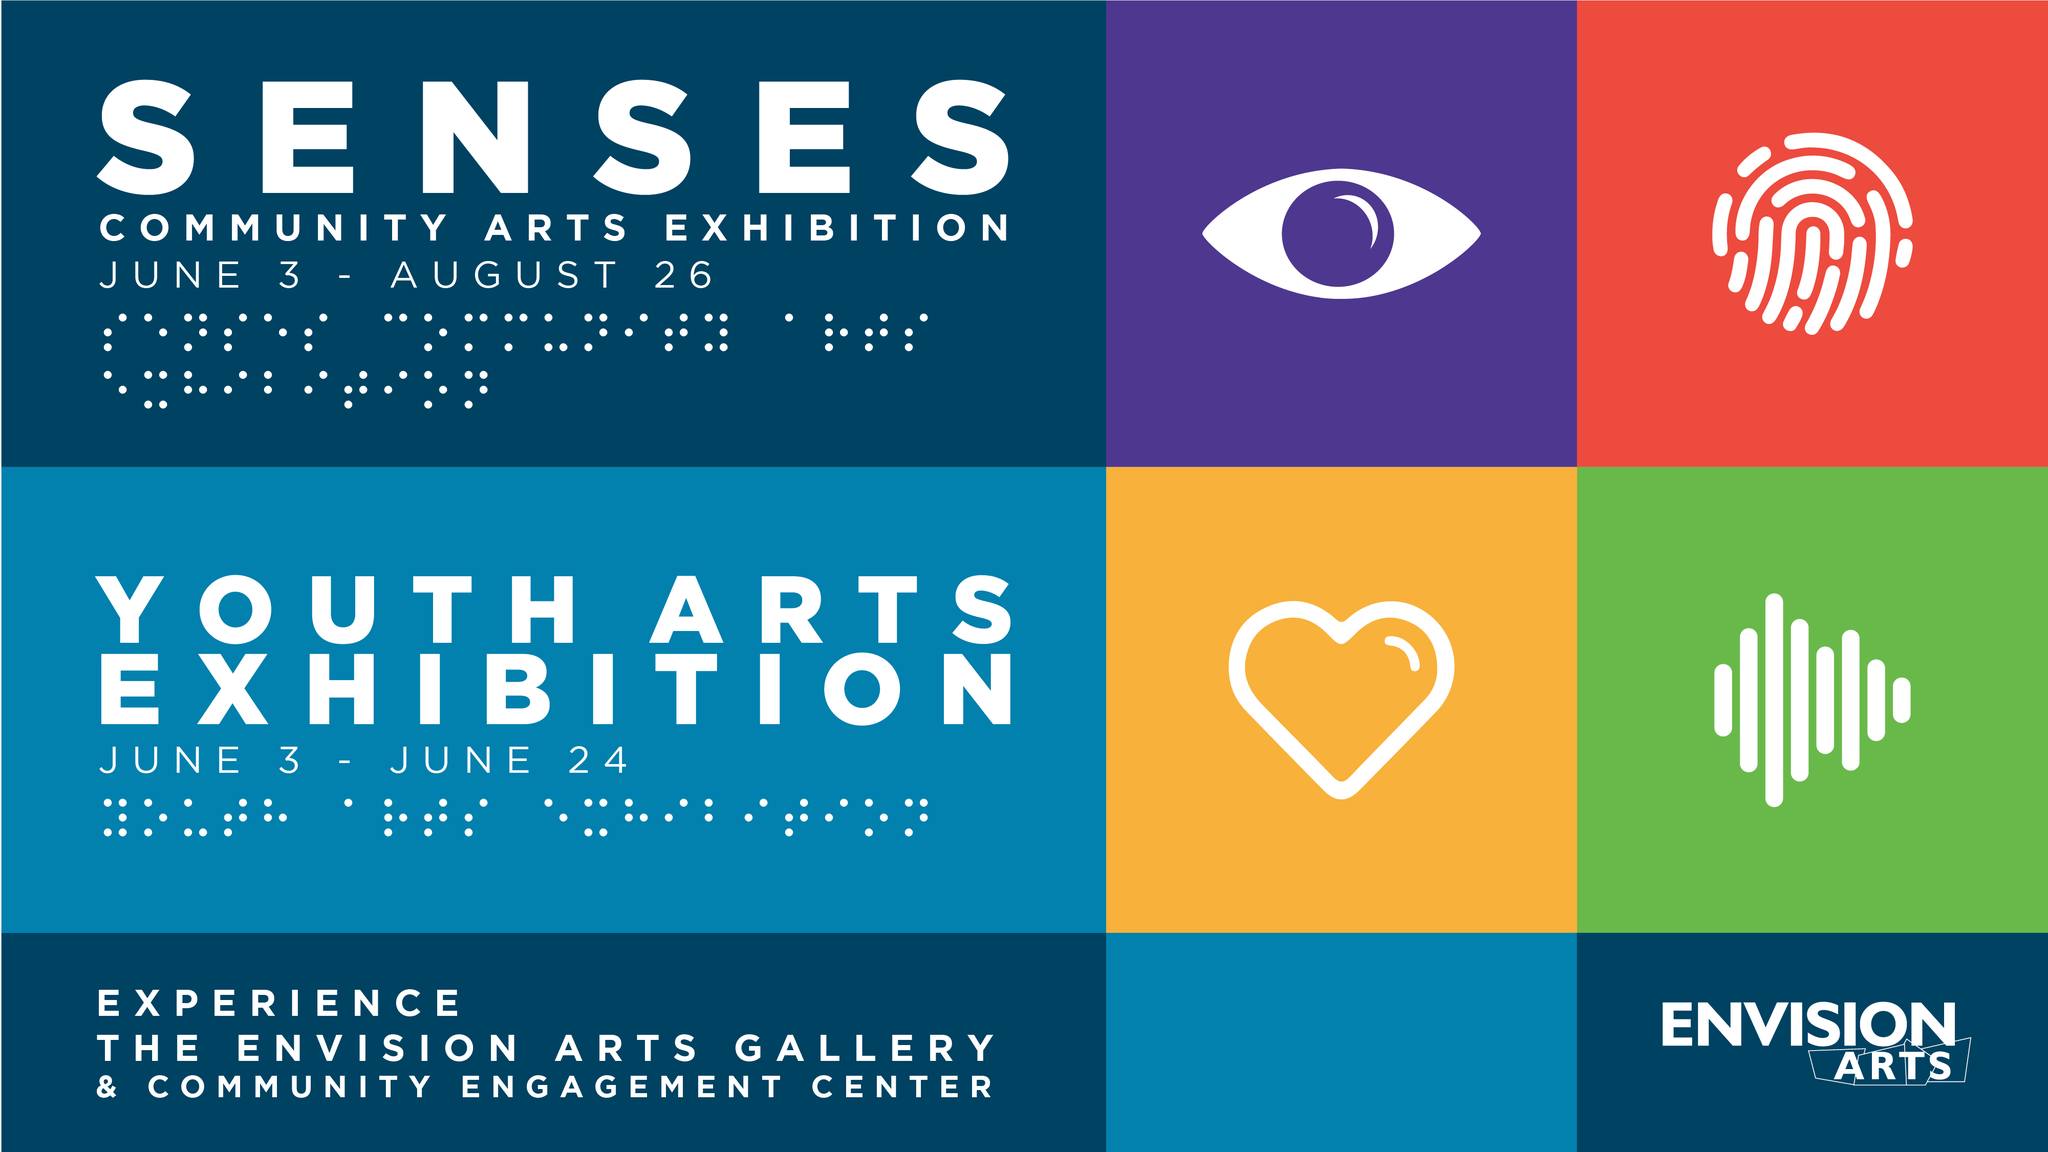 SENSES community and youth arts exhibition june 3 - august 26